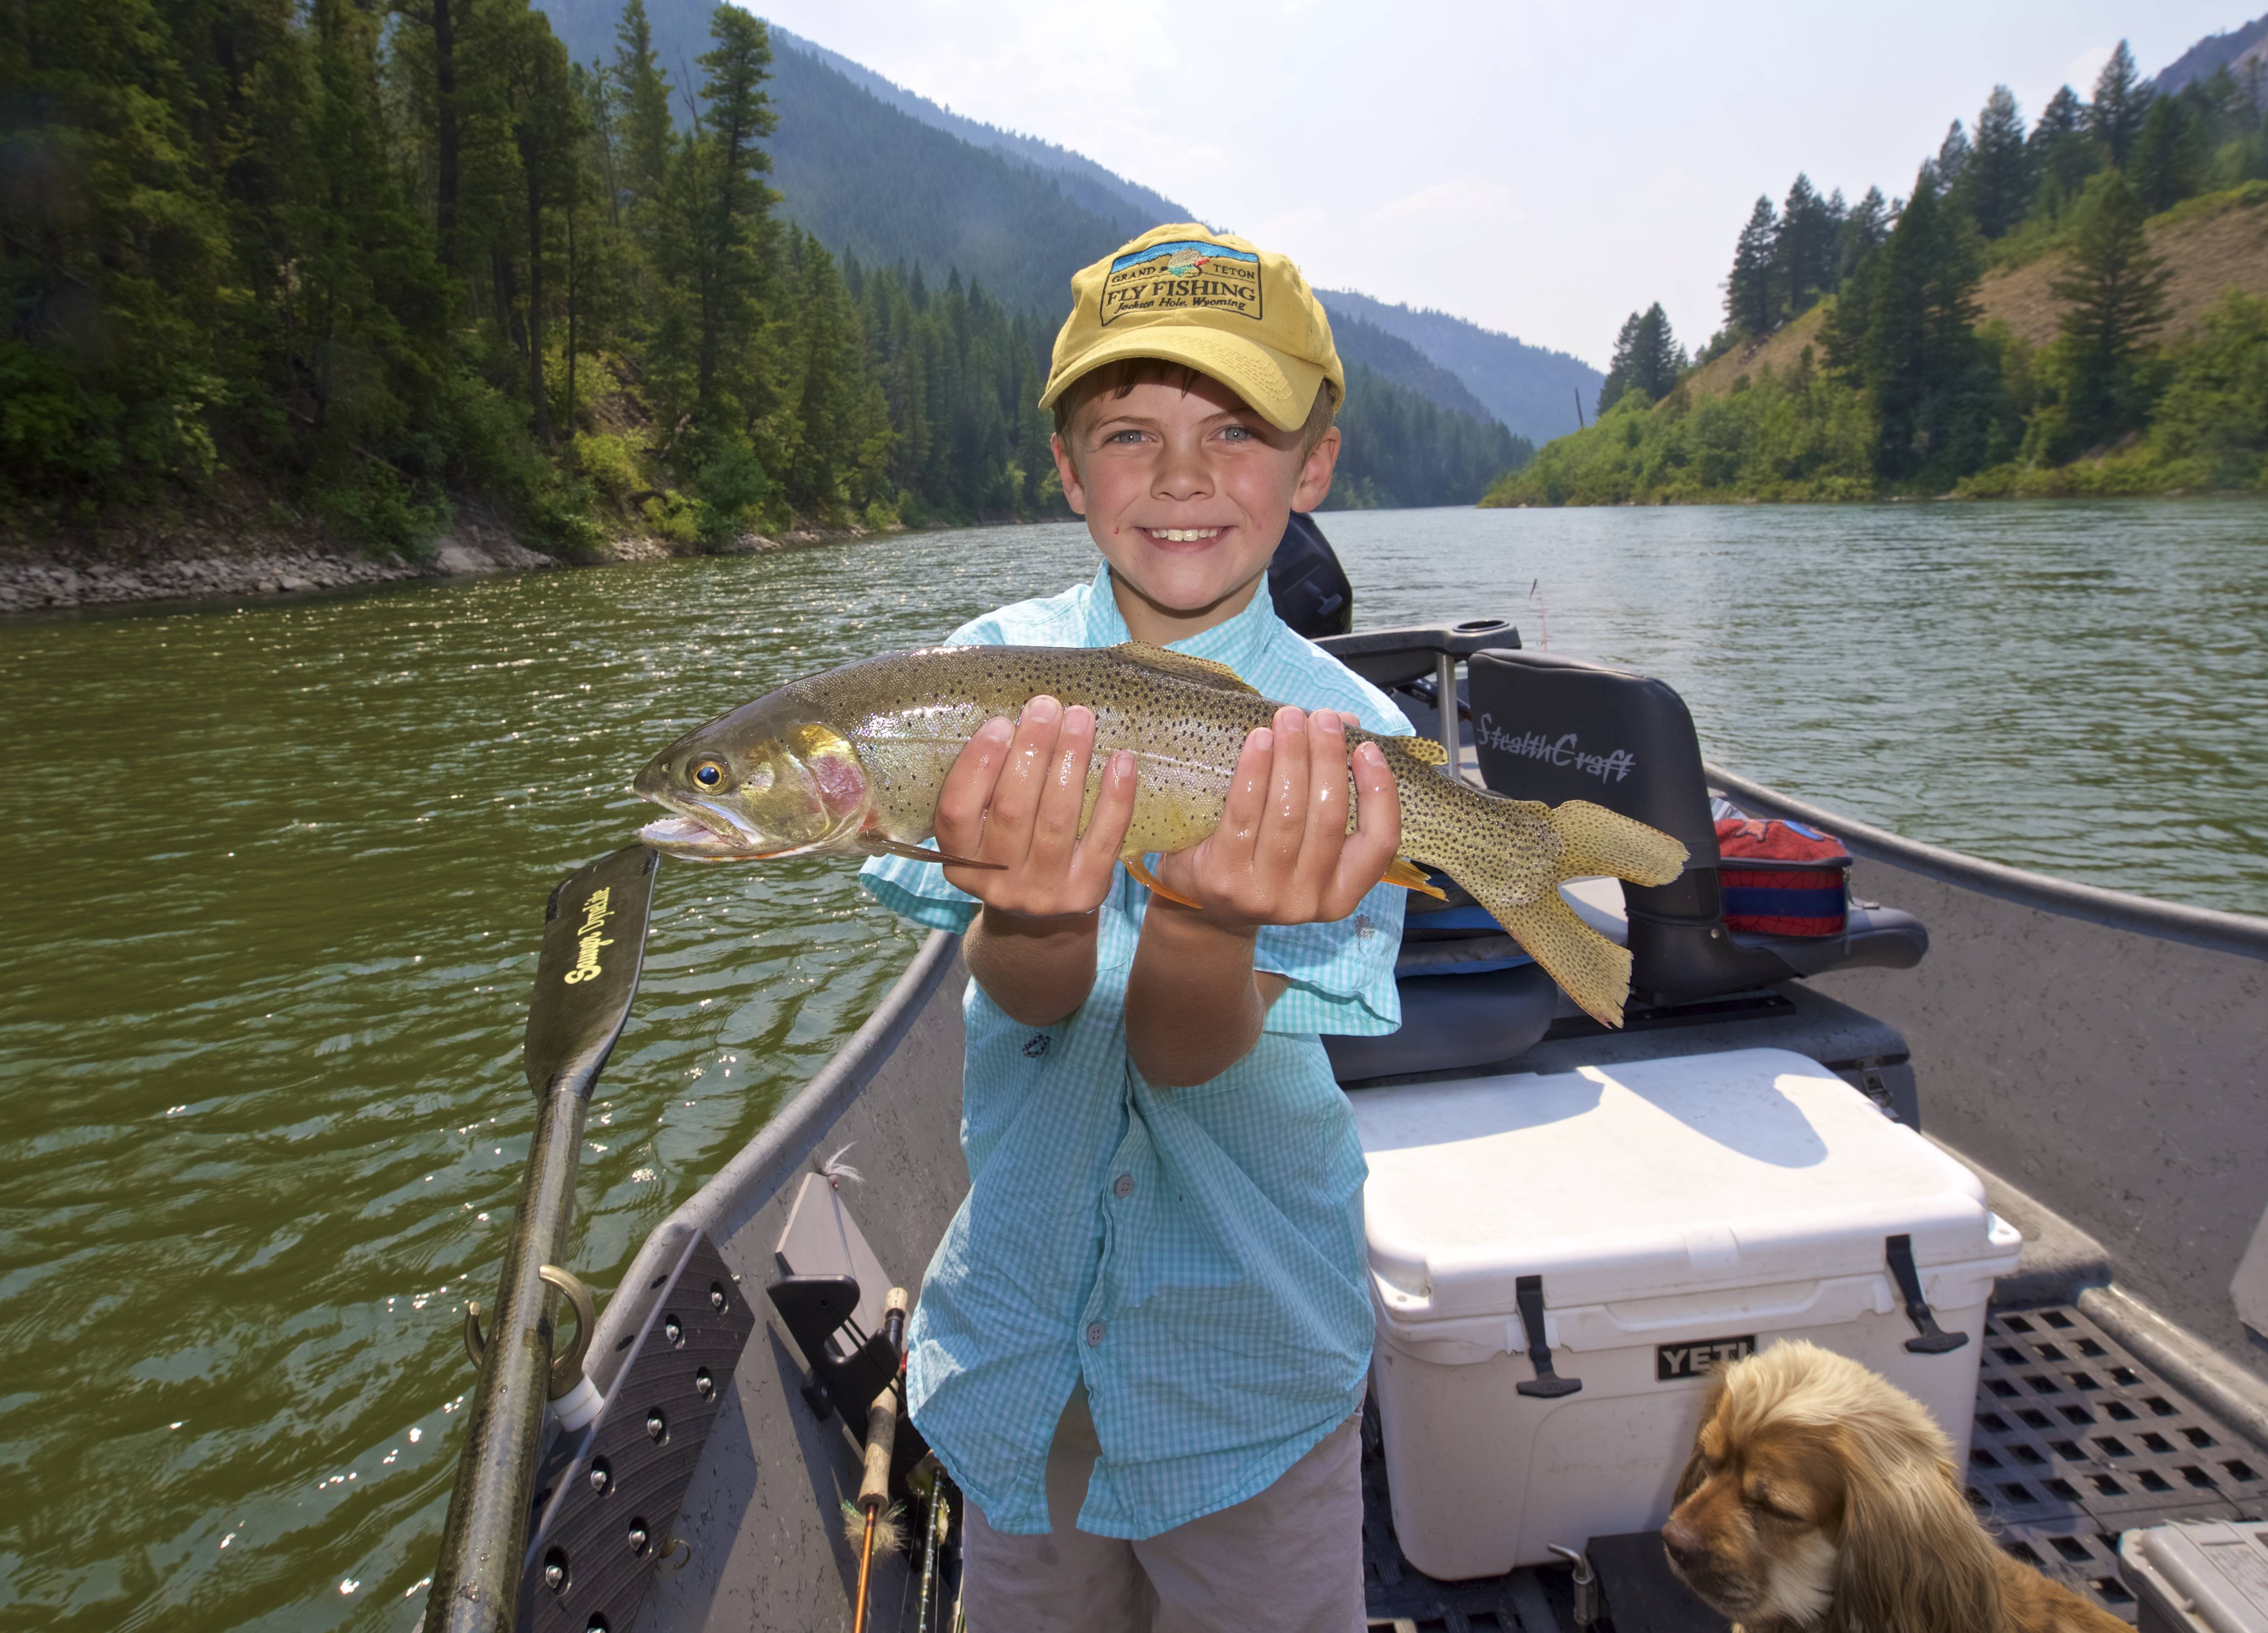 Snake River boy with a huge trout